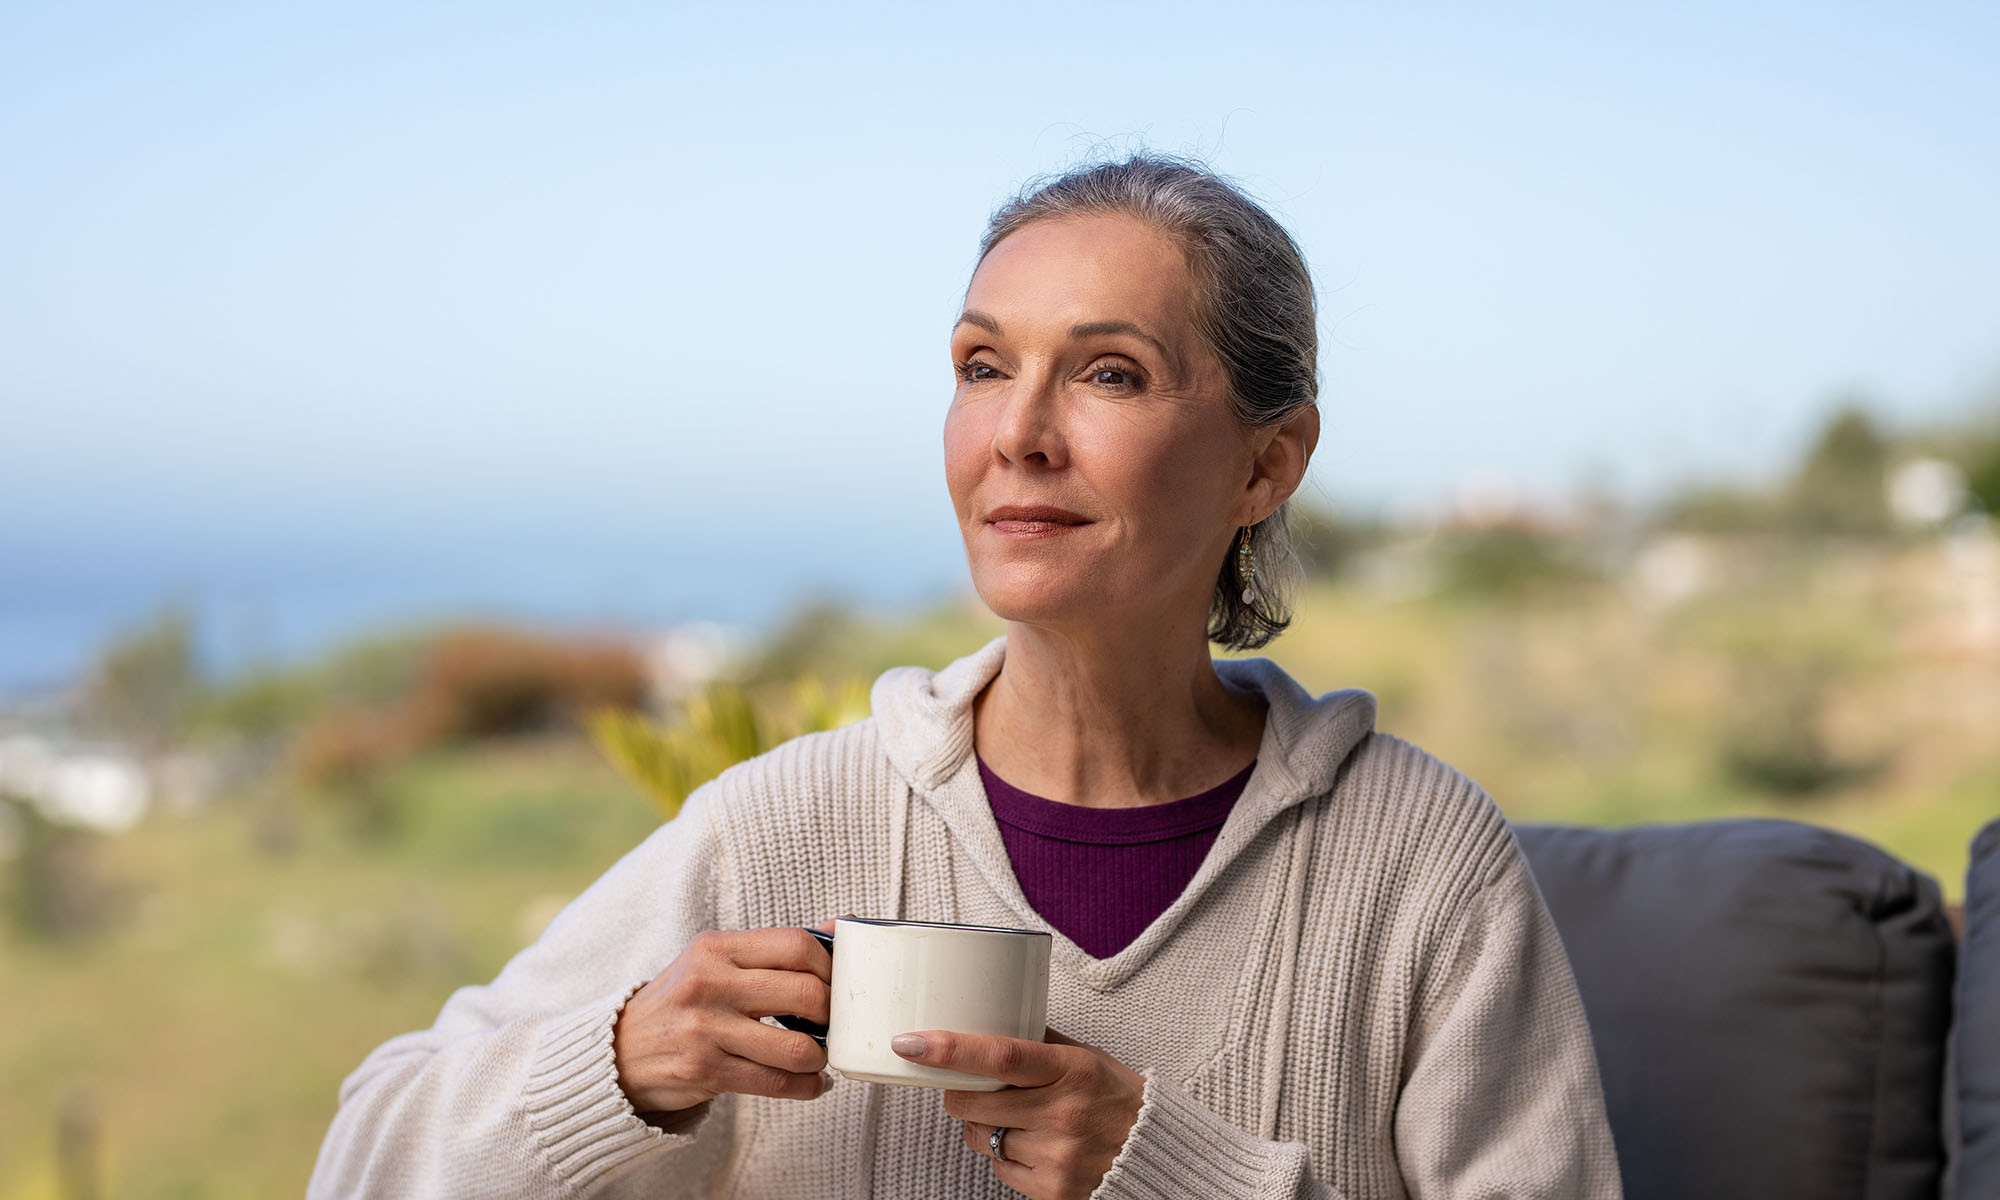 If You're A Woman Over 50, You Likely Need More Of This Brain-Critical Nutrient